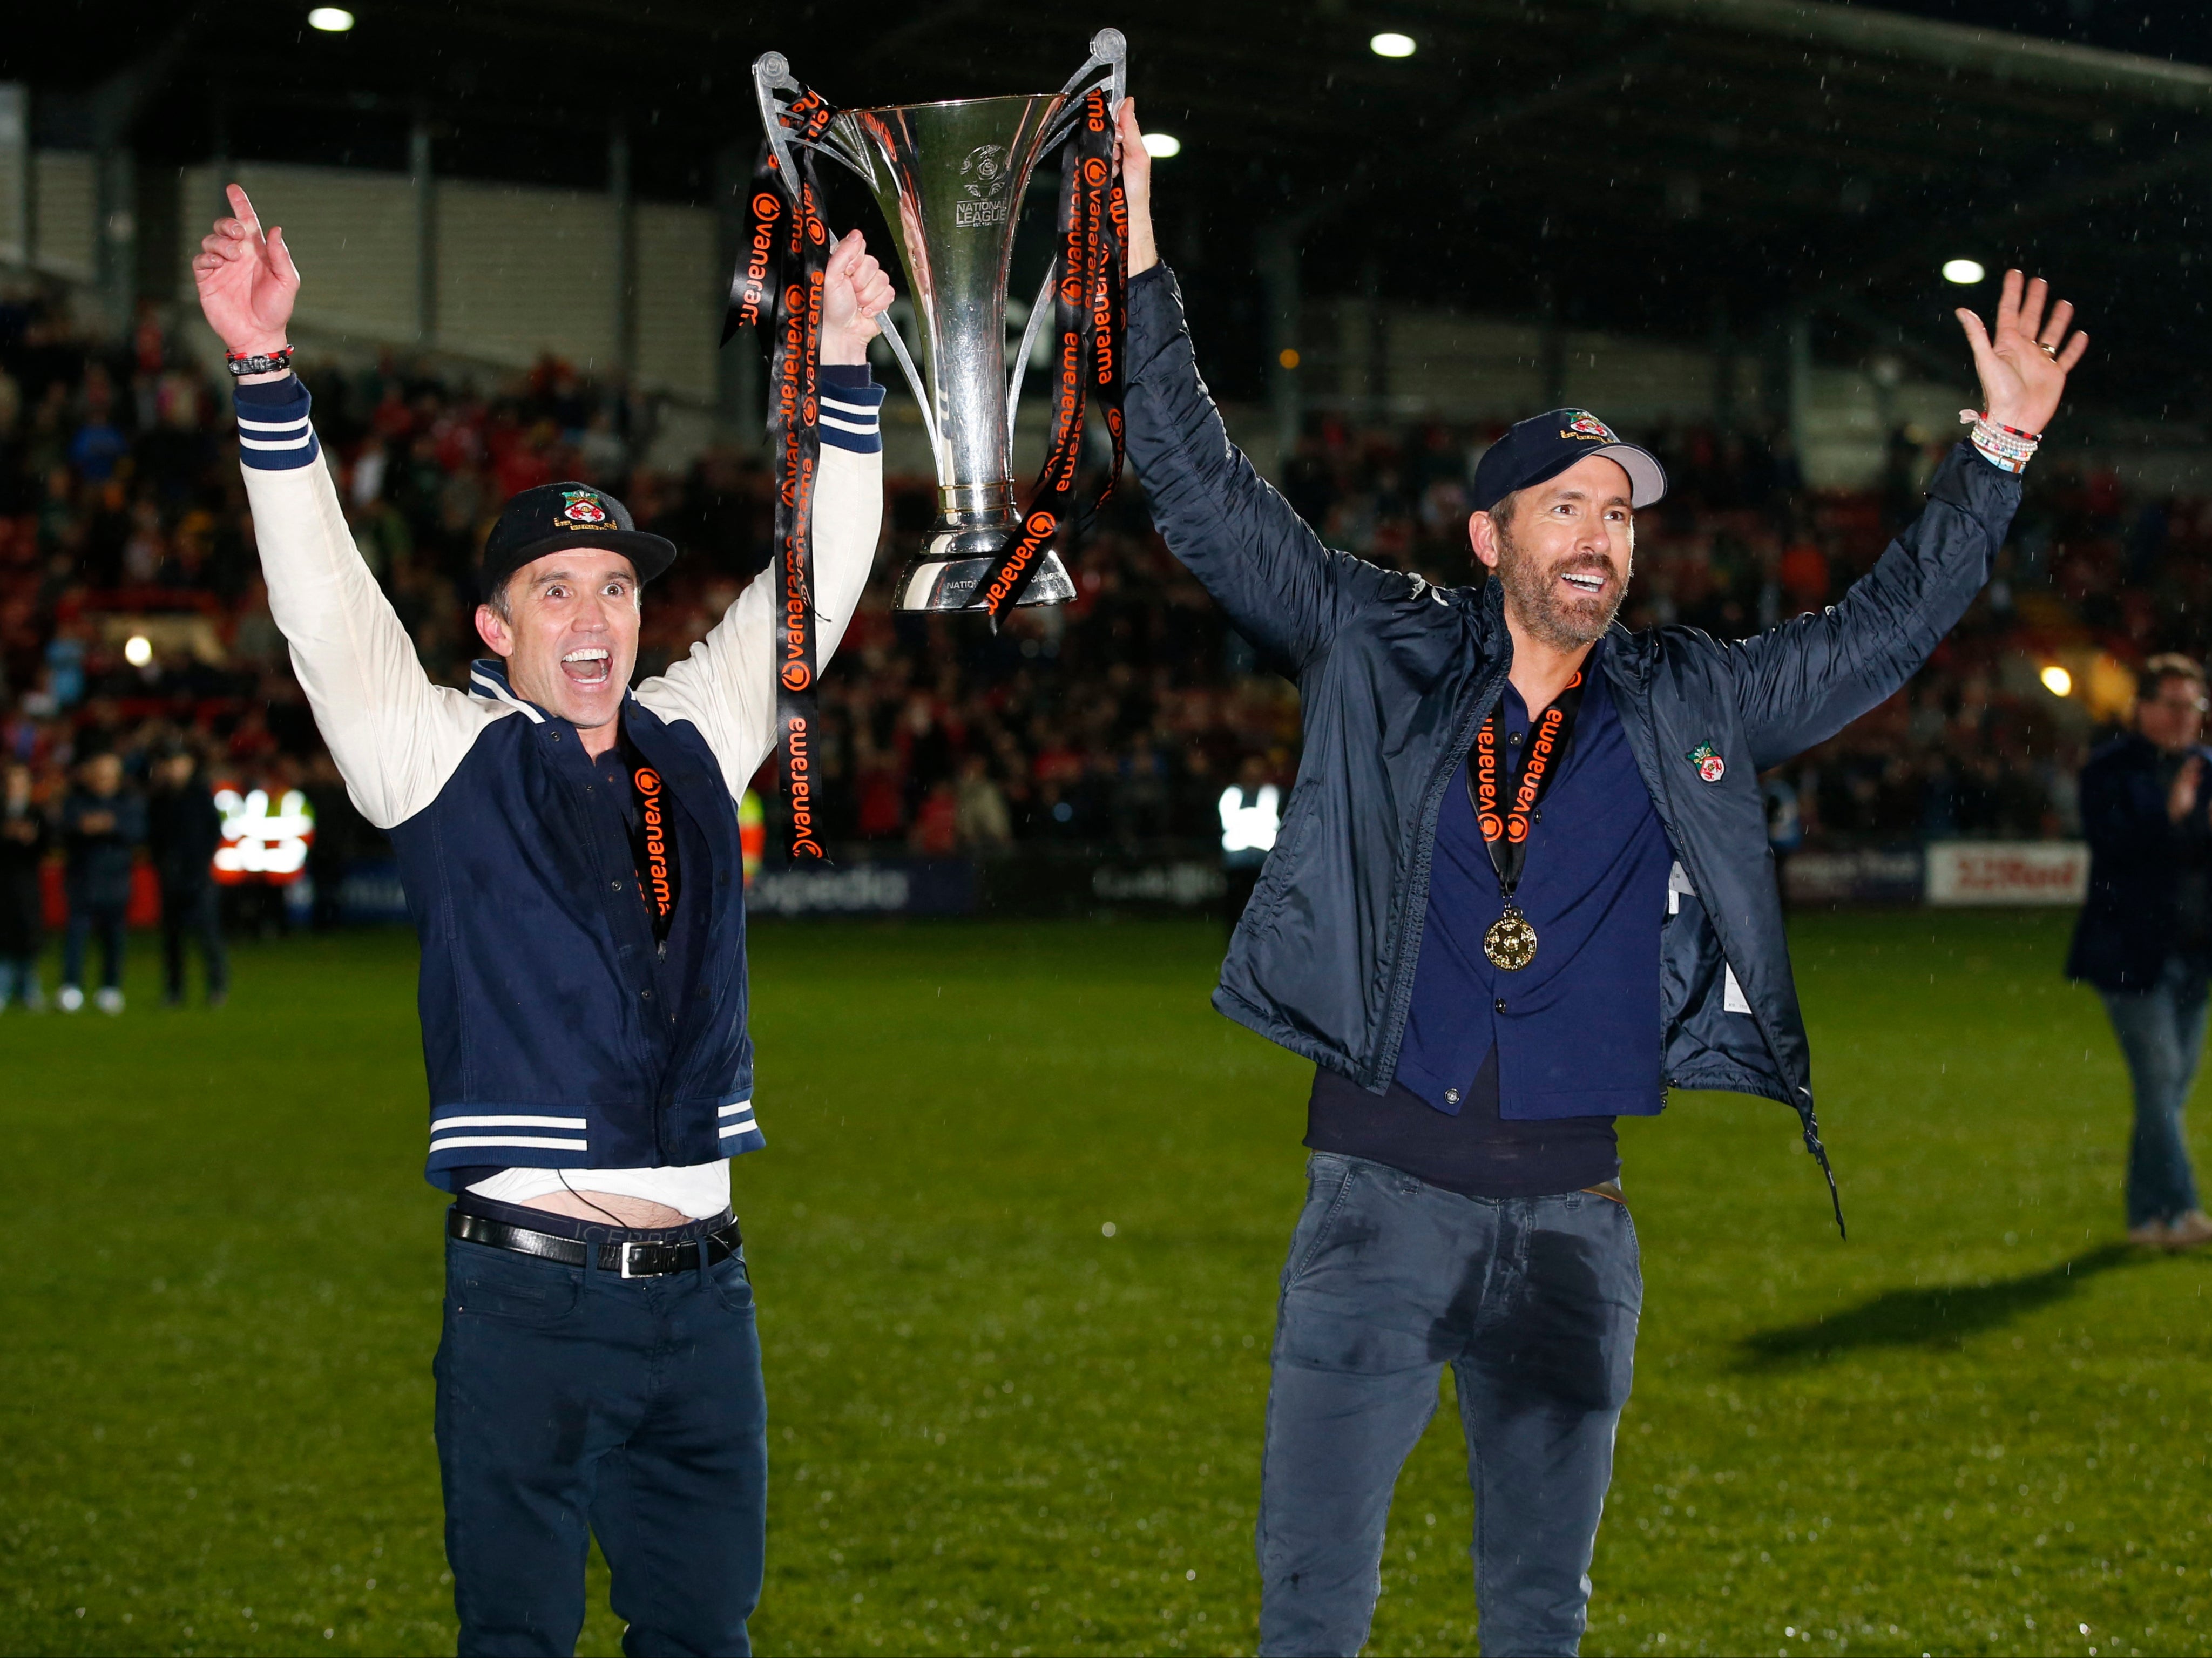 Wrexham co-owners Rob McElhenney and Ryan Reynolds celebrate with the trophy on the pitch after Wrexham win the National League and promotion to League